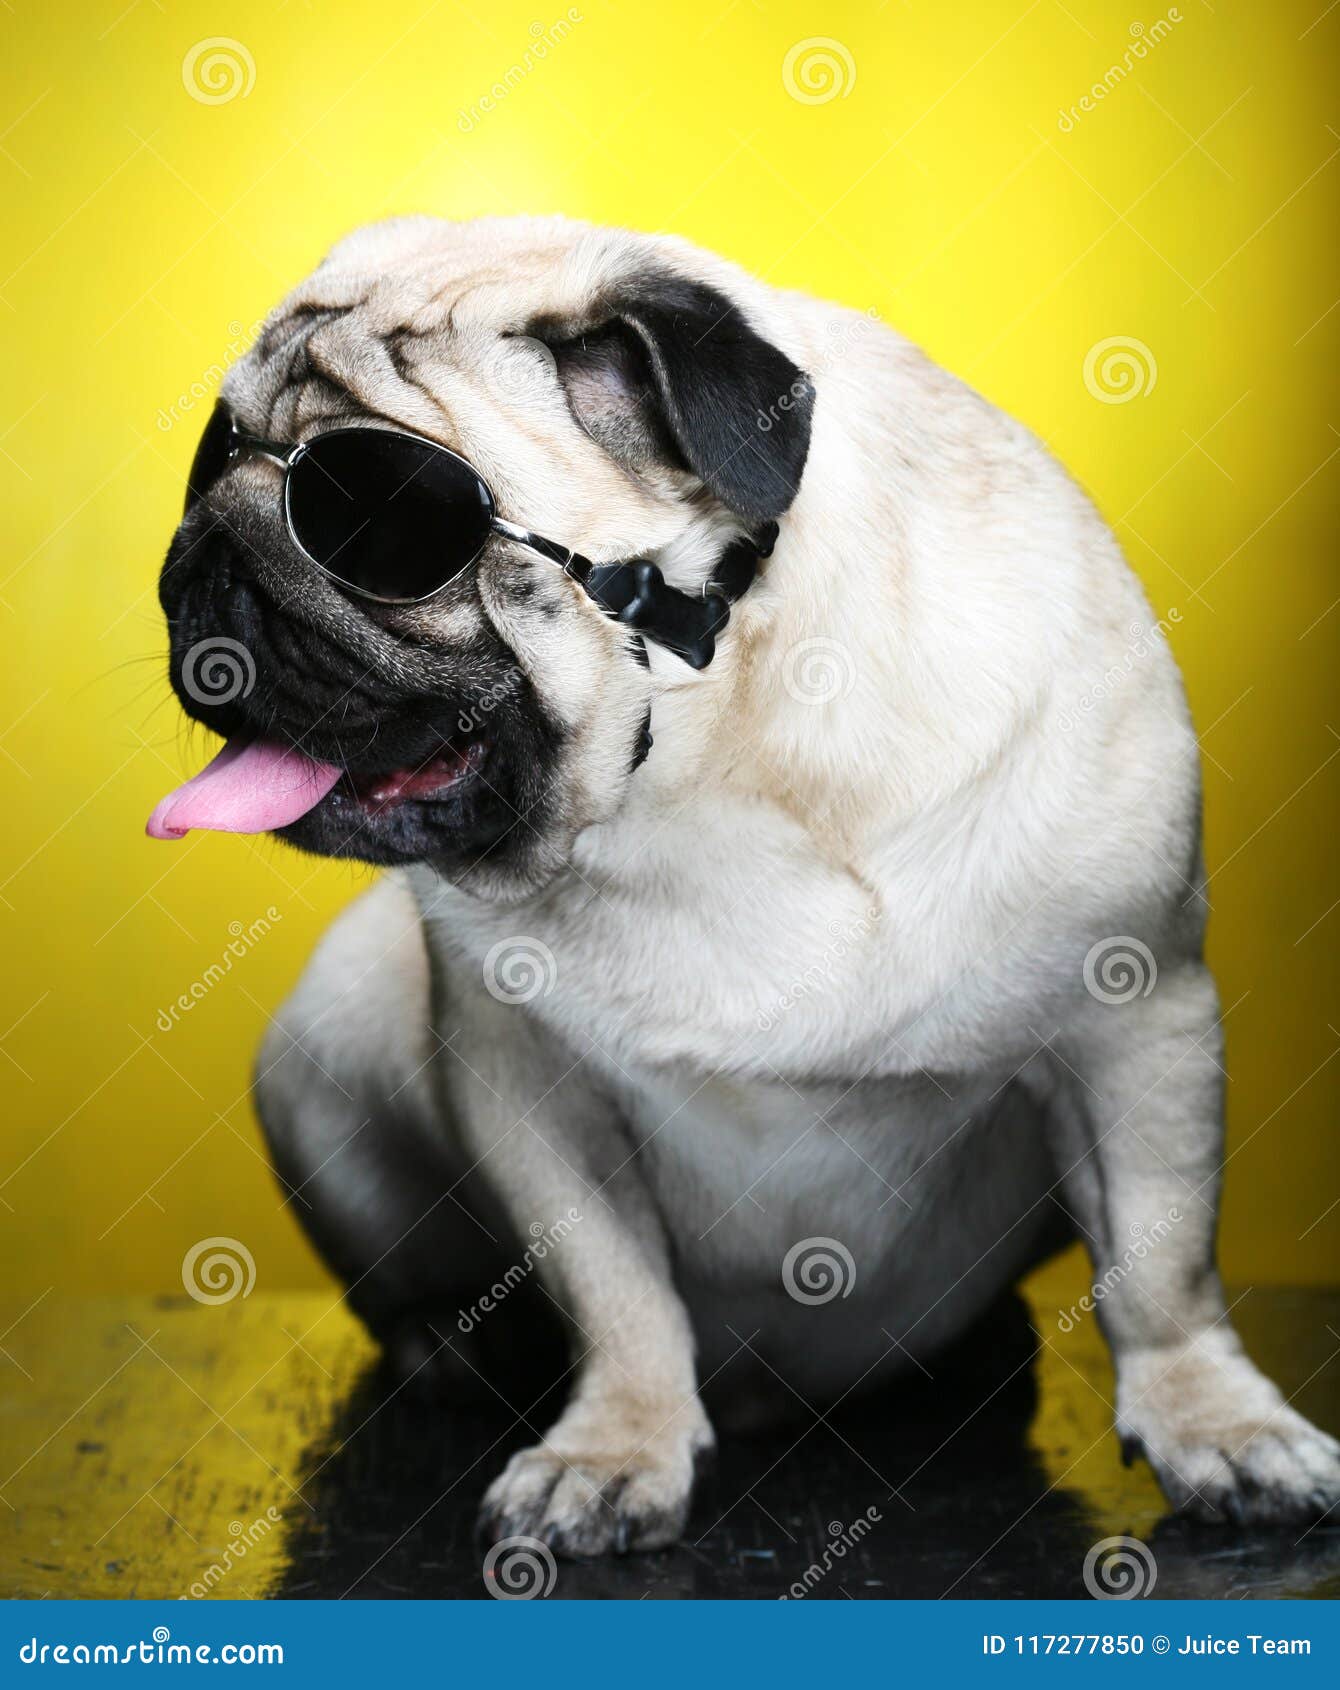 Pug with sunglasses. stock photo. Image of expression - 117277850